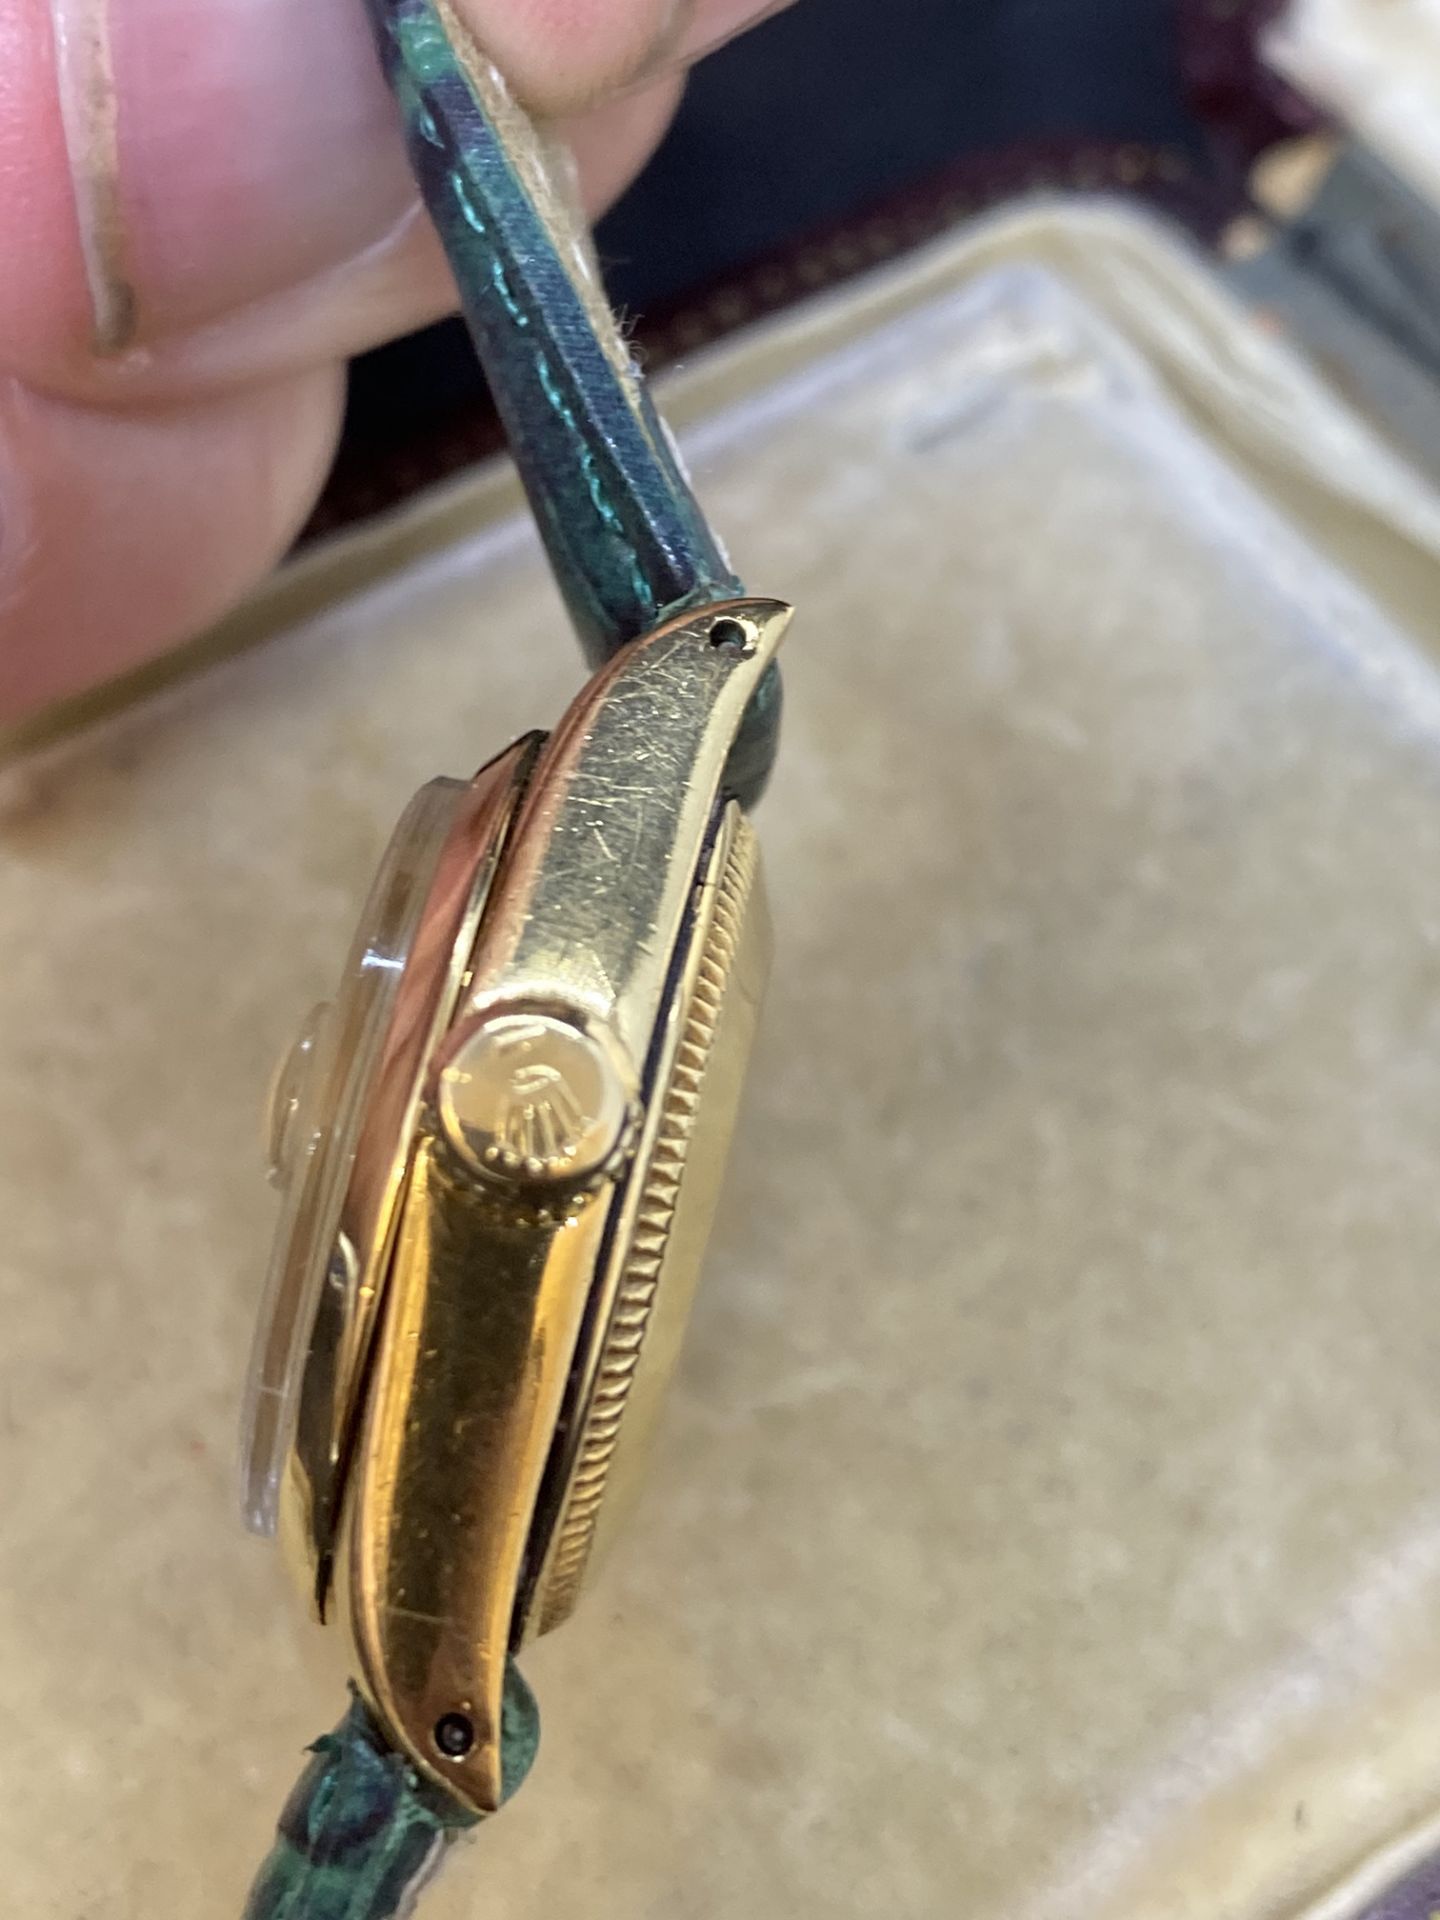 18ct GOLD ROLEX WATCH ON LEATHER STRAP - Image 8 of 8